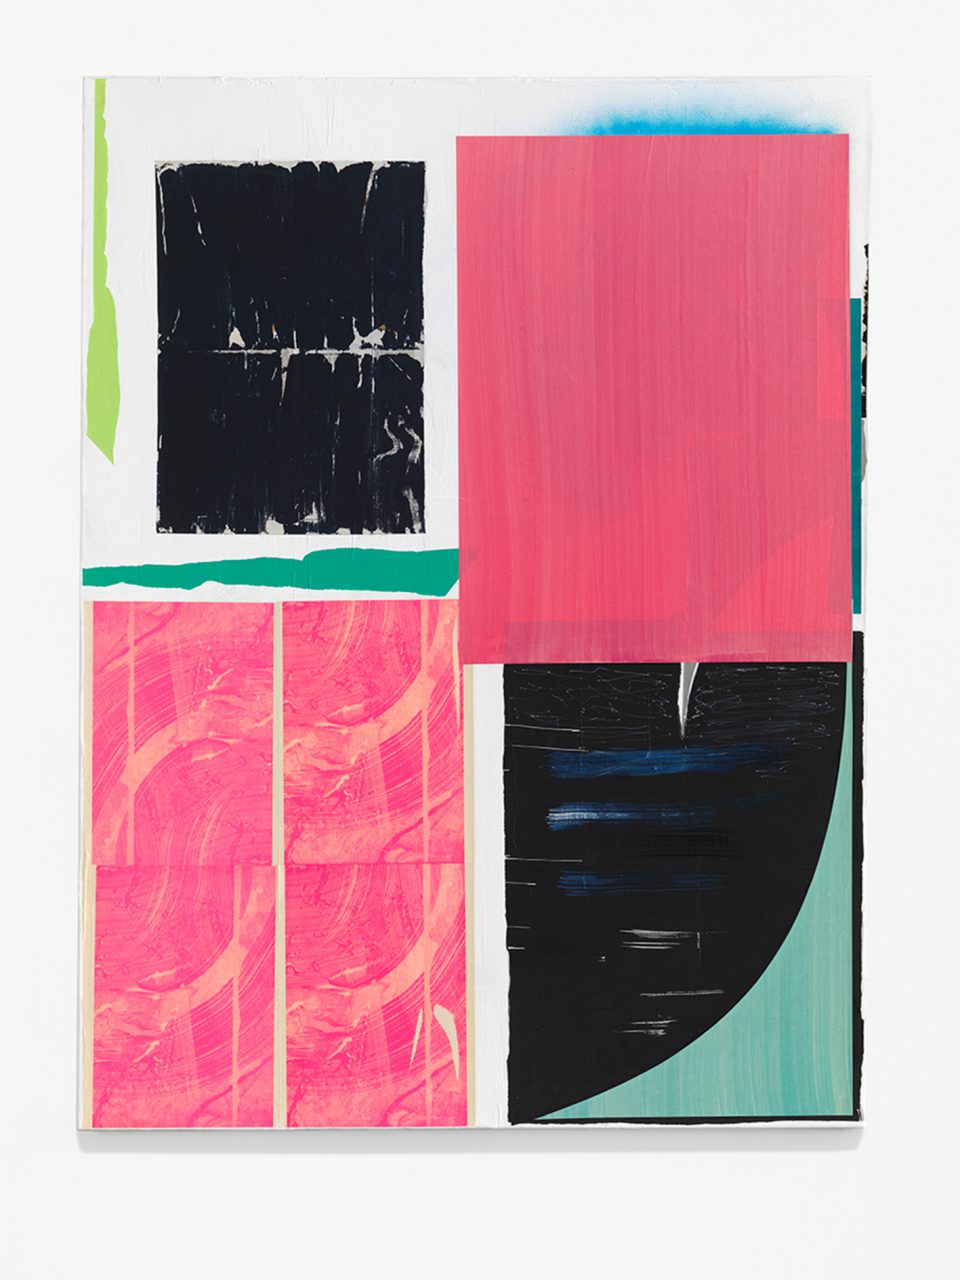 Untitled, 2018, flashe, acrylic, pigment, paper, screen print, monotype on canvas, 160x120cm